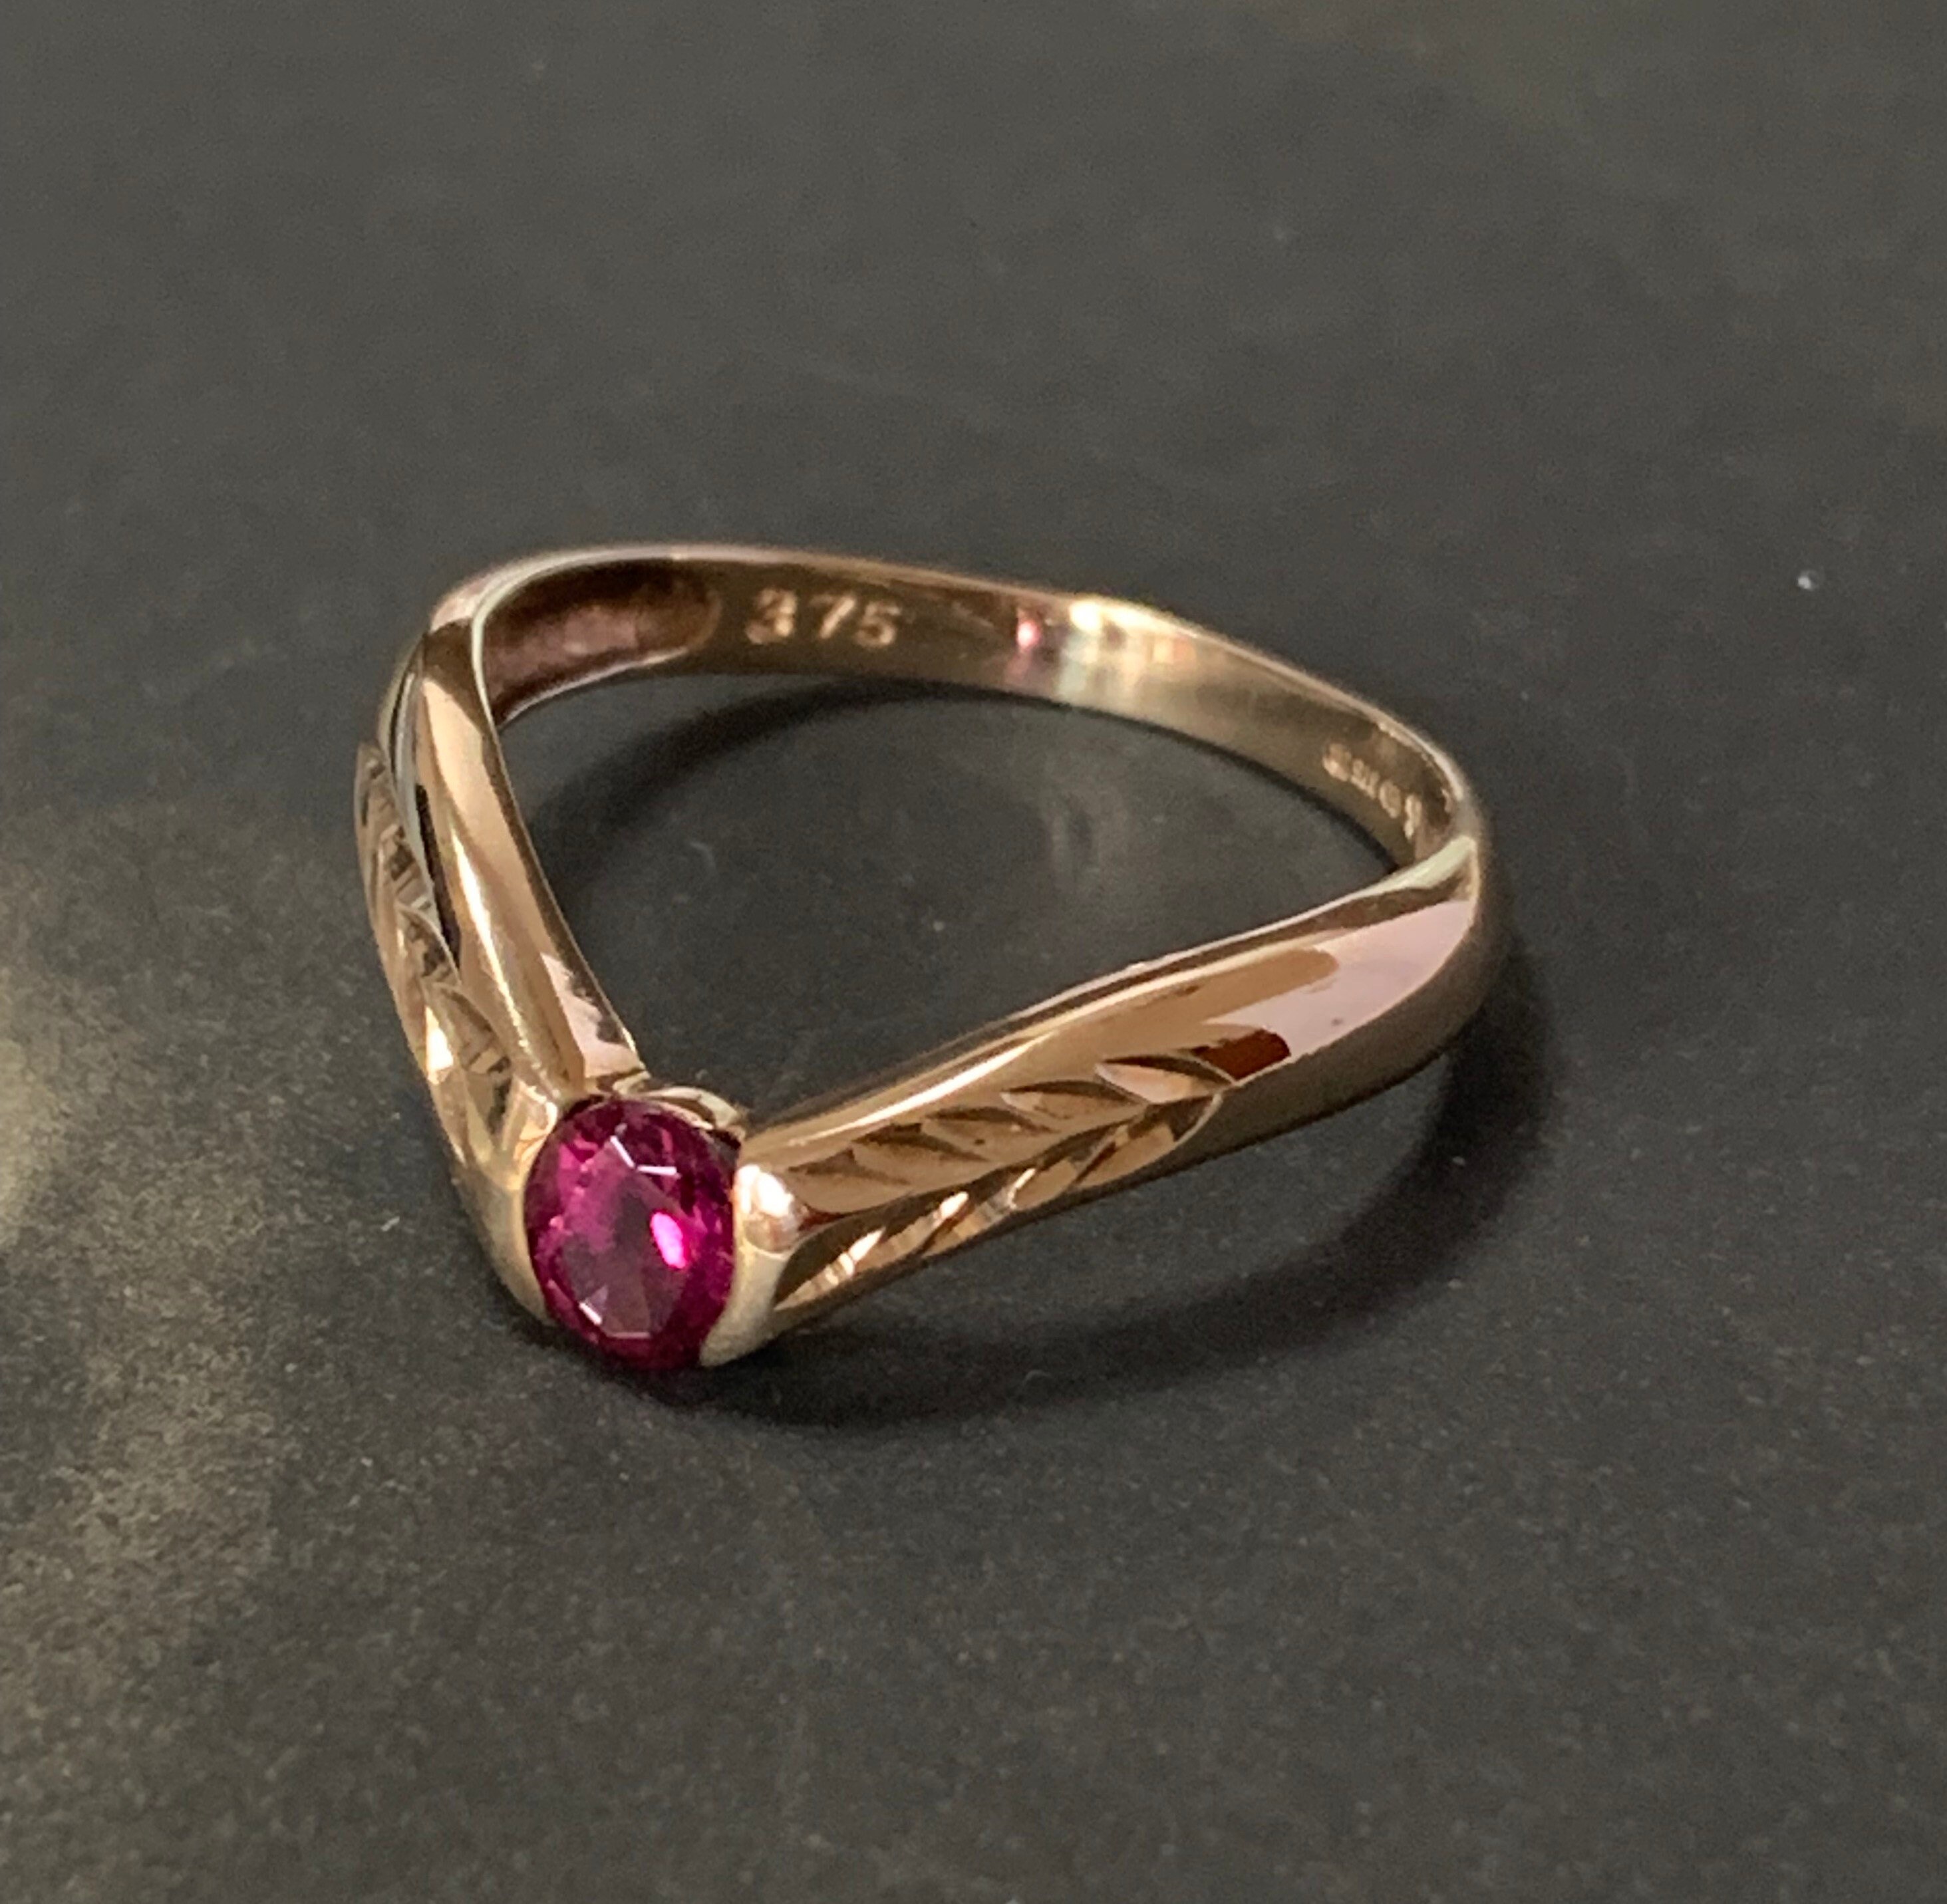 Vintage Wishbone Gold Ring Showcases A Timeless Design, Expertly Crafted in 9Ct With Captivating Oval Facet Cut Pink Tourmaline